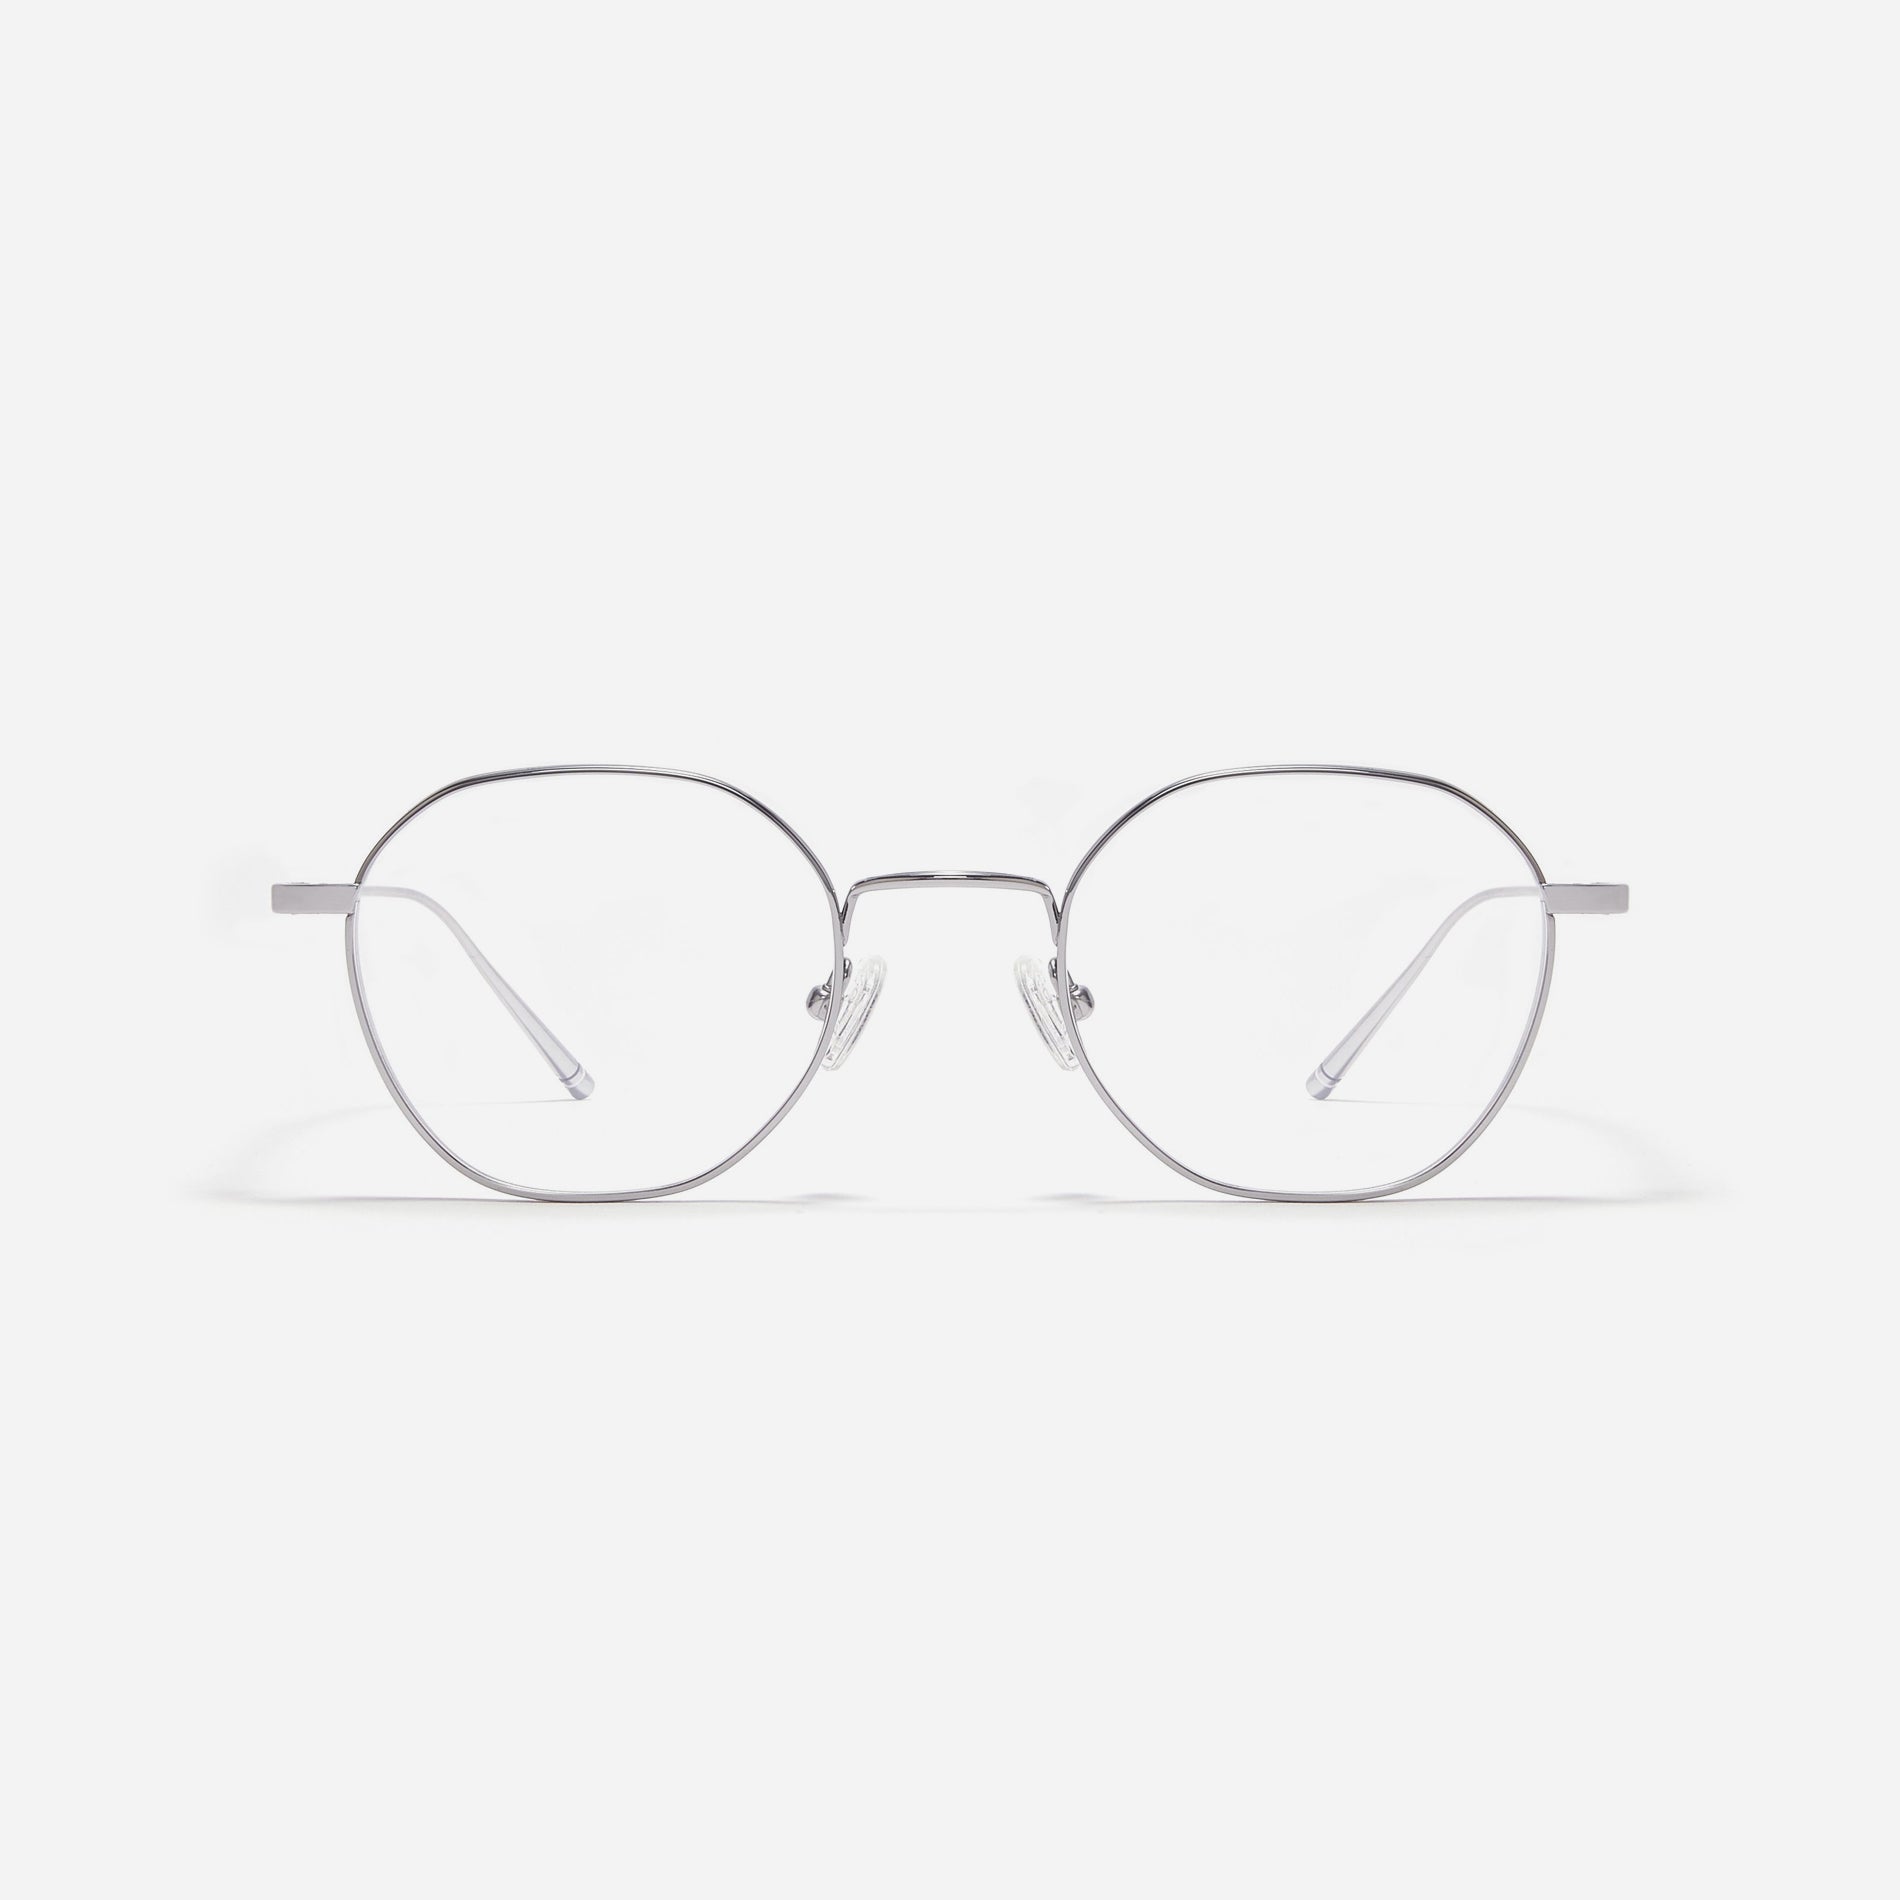 Hexagonal-shaped, full-metal eyeglasses with a dual-rim structure designed to accommodate thicker, high-prescription lenses. Both the frame and temples are made of pure titanium, ensuring a lightweight and comfortable fit.